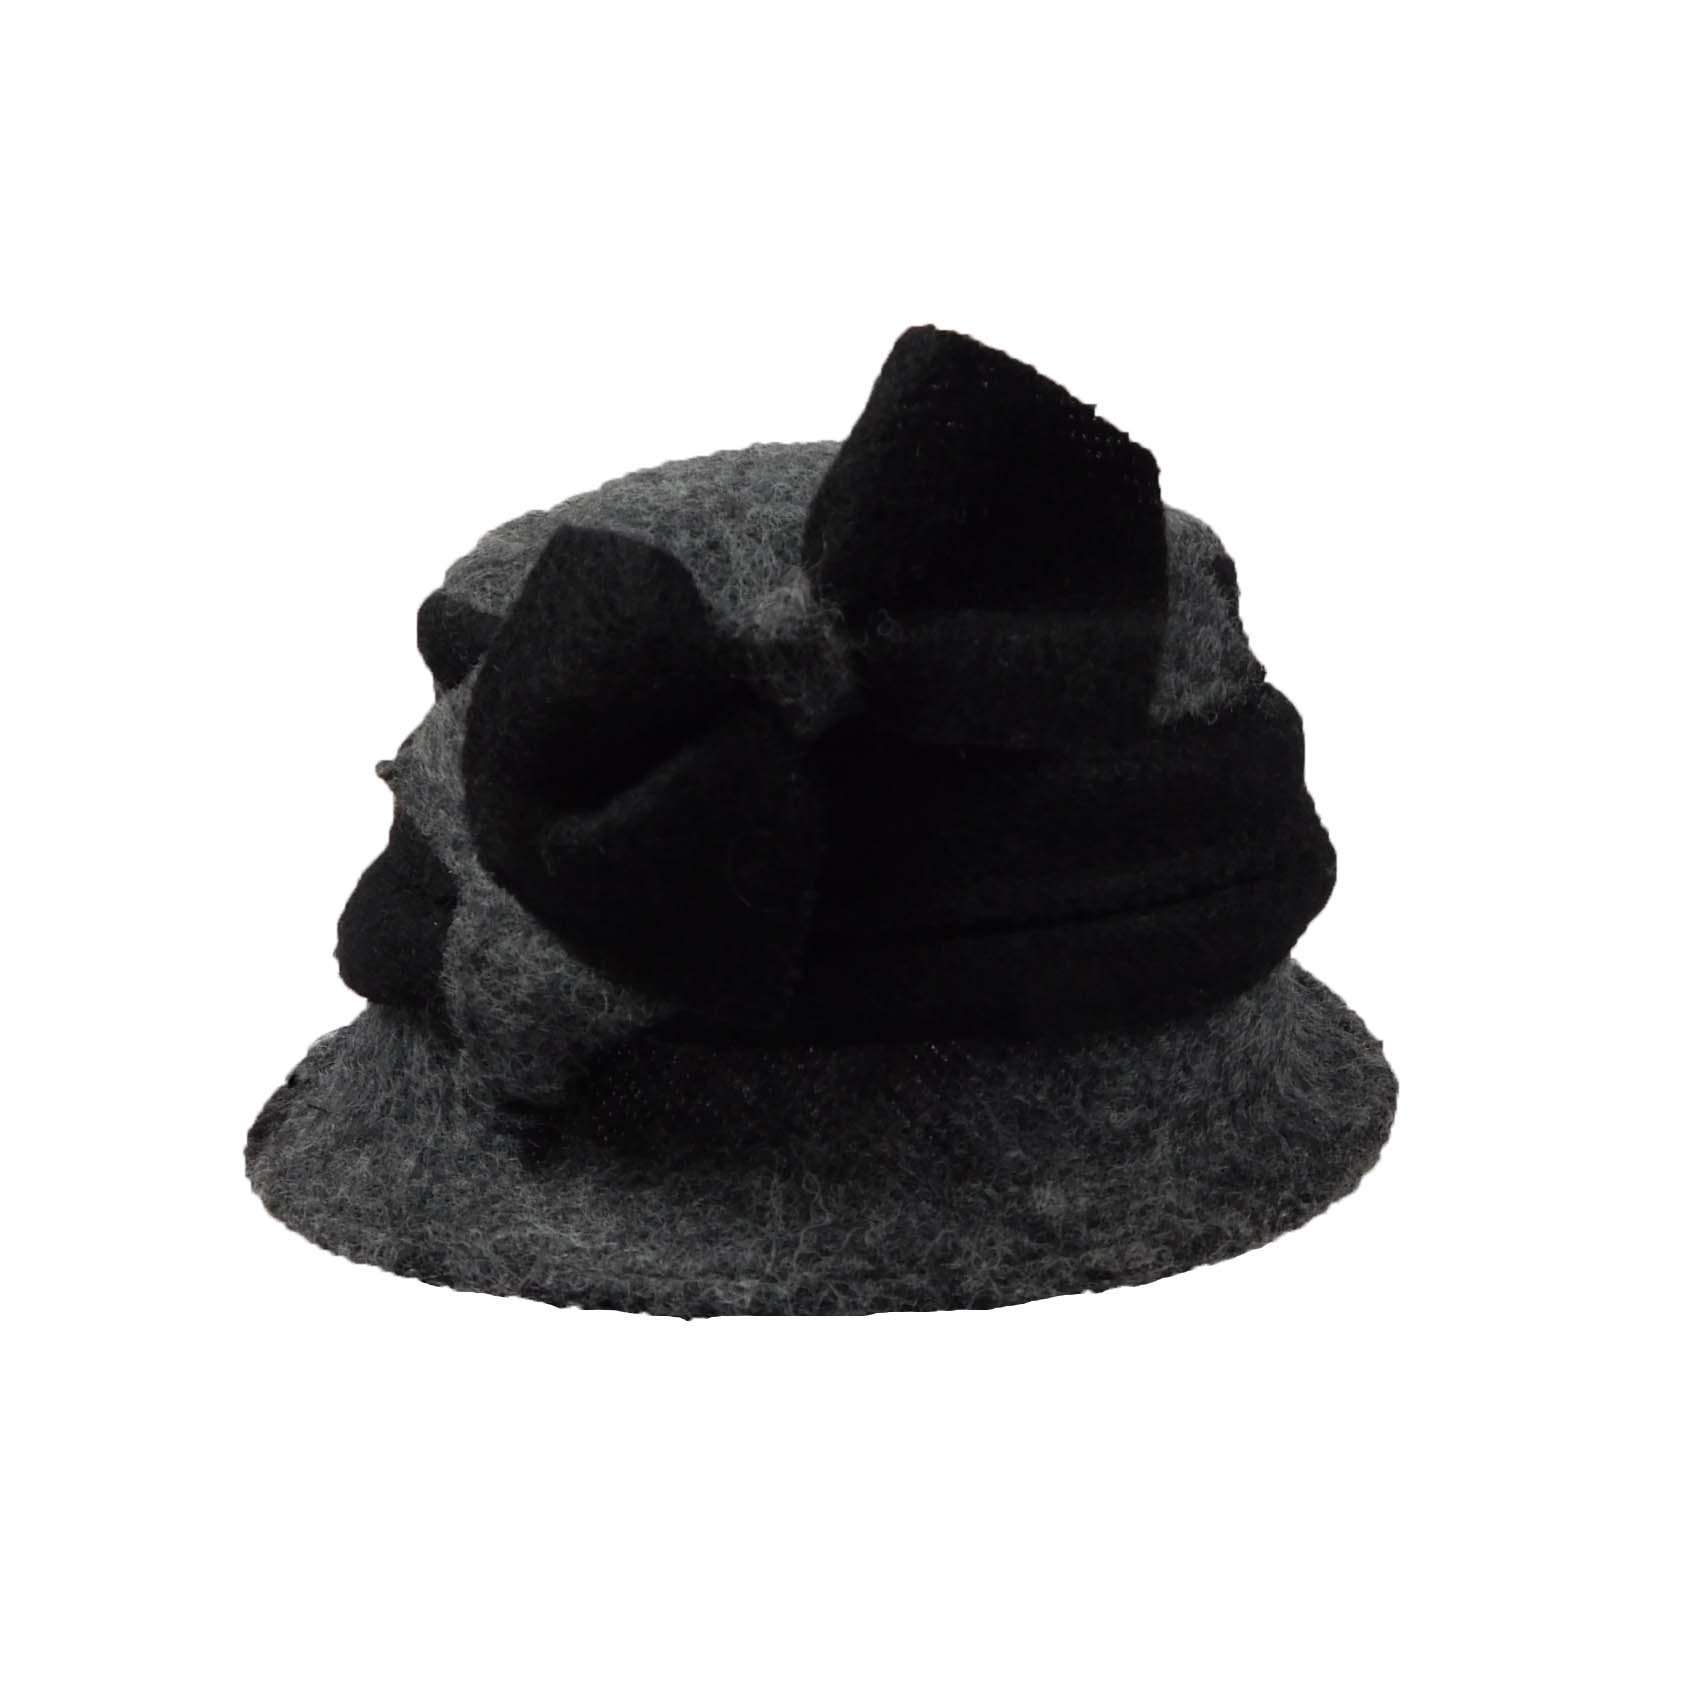 Little Two Tone Cloche with Bow Beanie Jeanne Simmons WWBW253Gk Grey / Black  